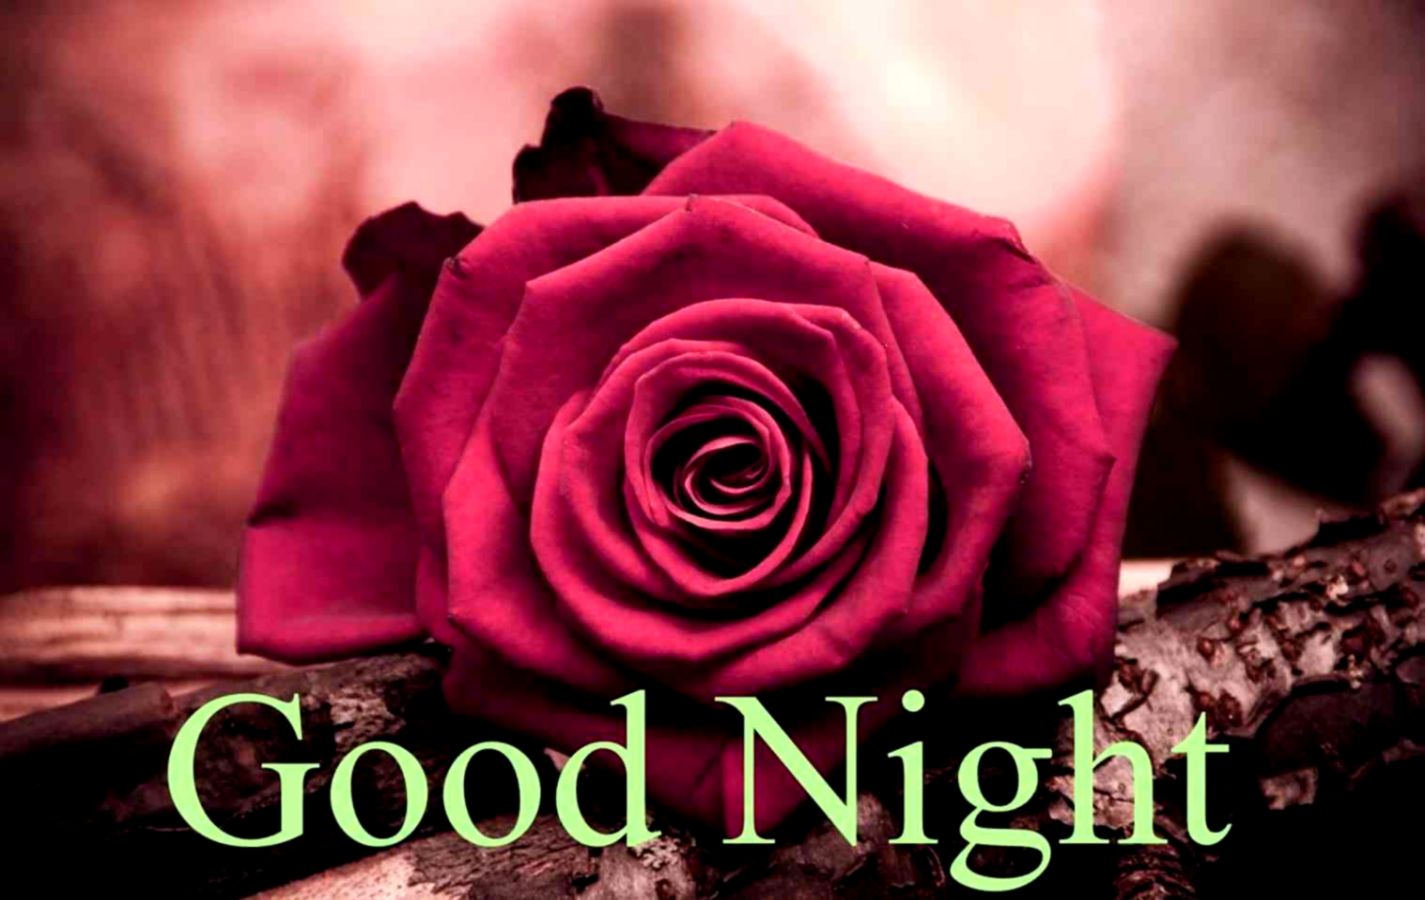 30 Best Good Night Images Pictures With Most Beautiful - Rose Flower Wallpaper Desktop - HD Wallpaper 